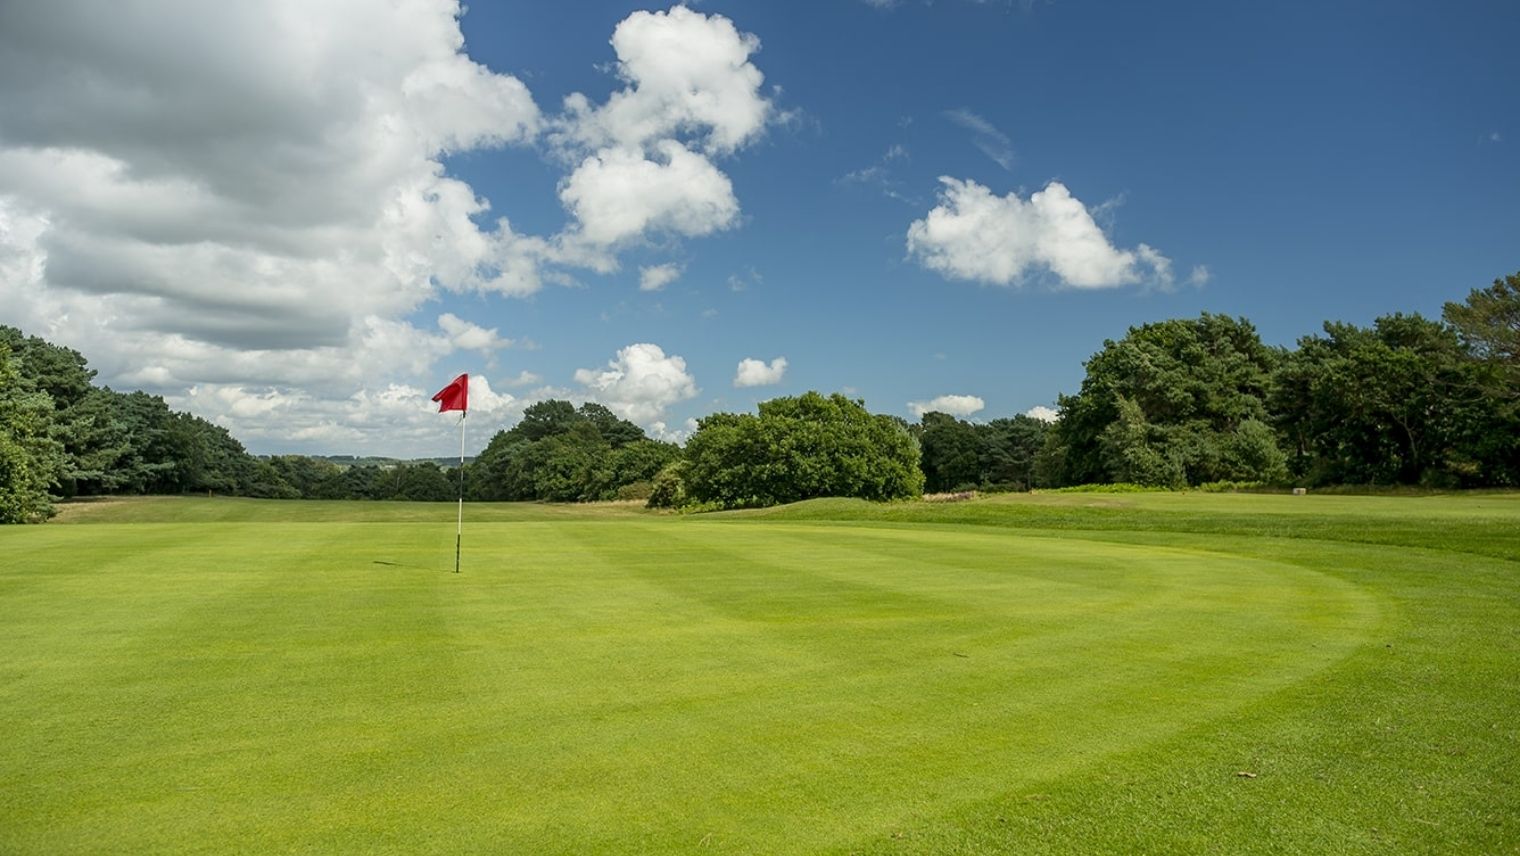 View of the green at Queen's Park golf course